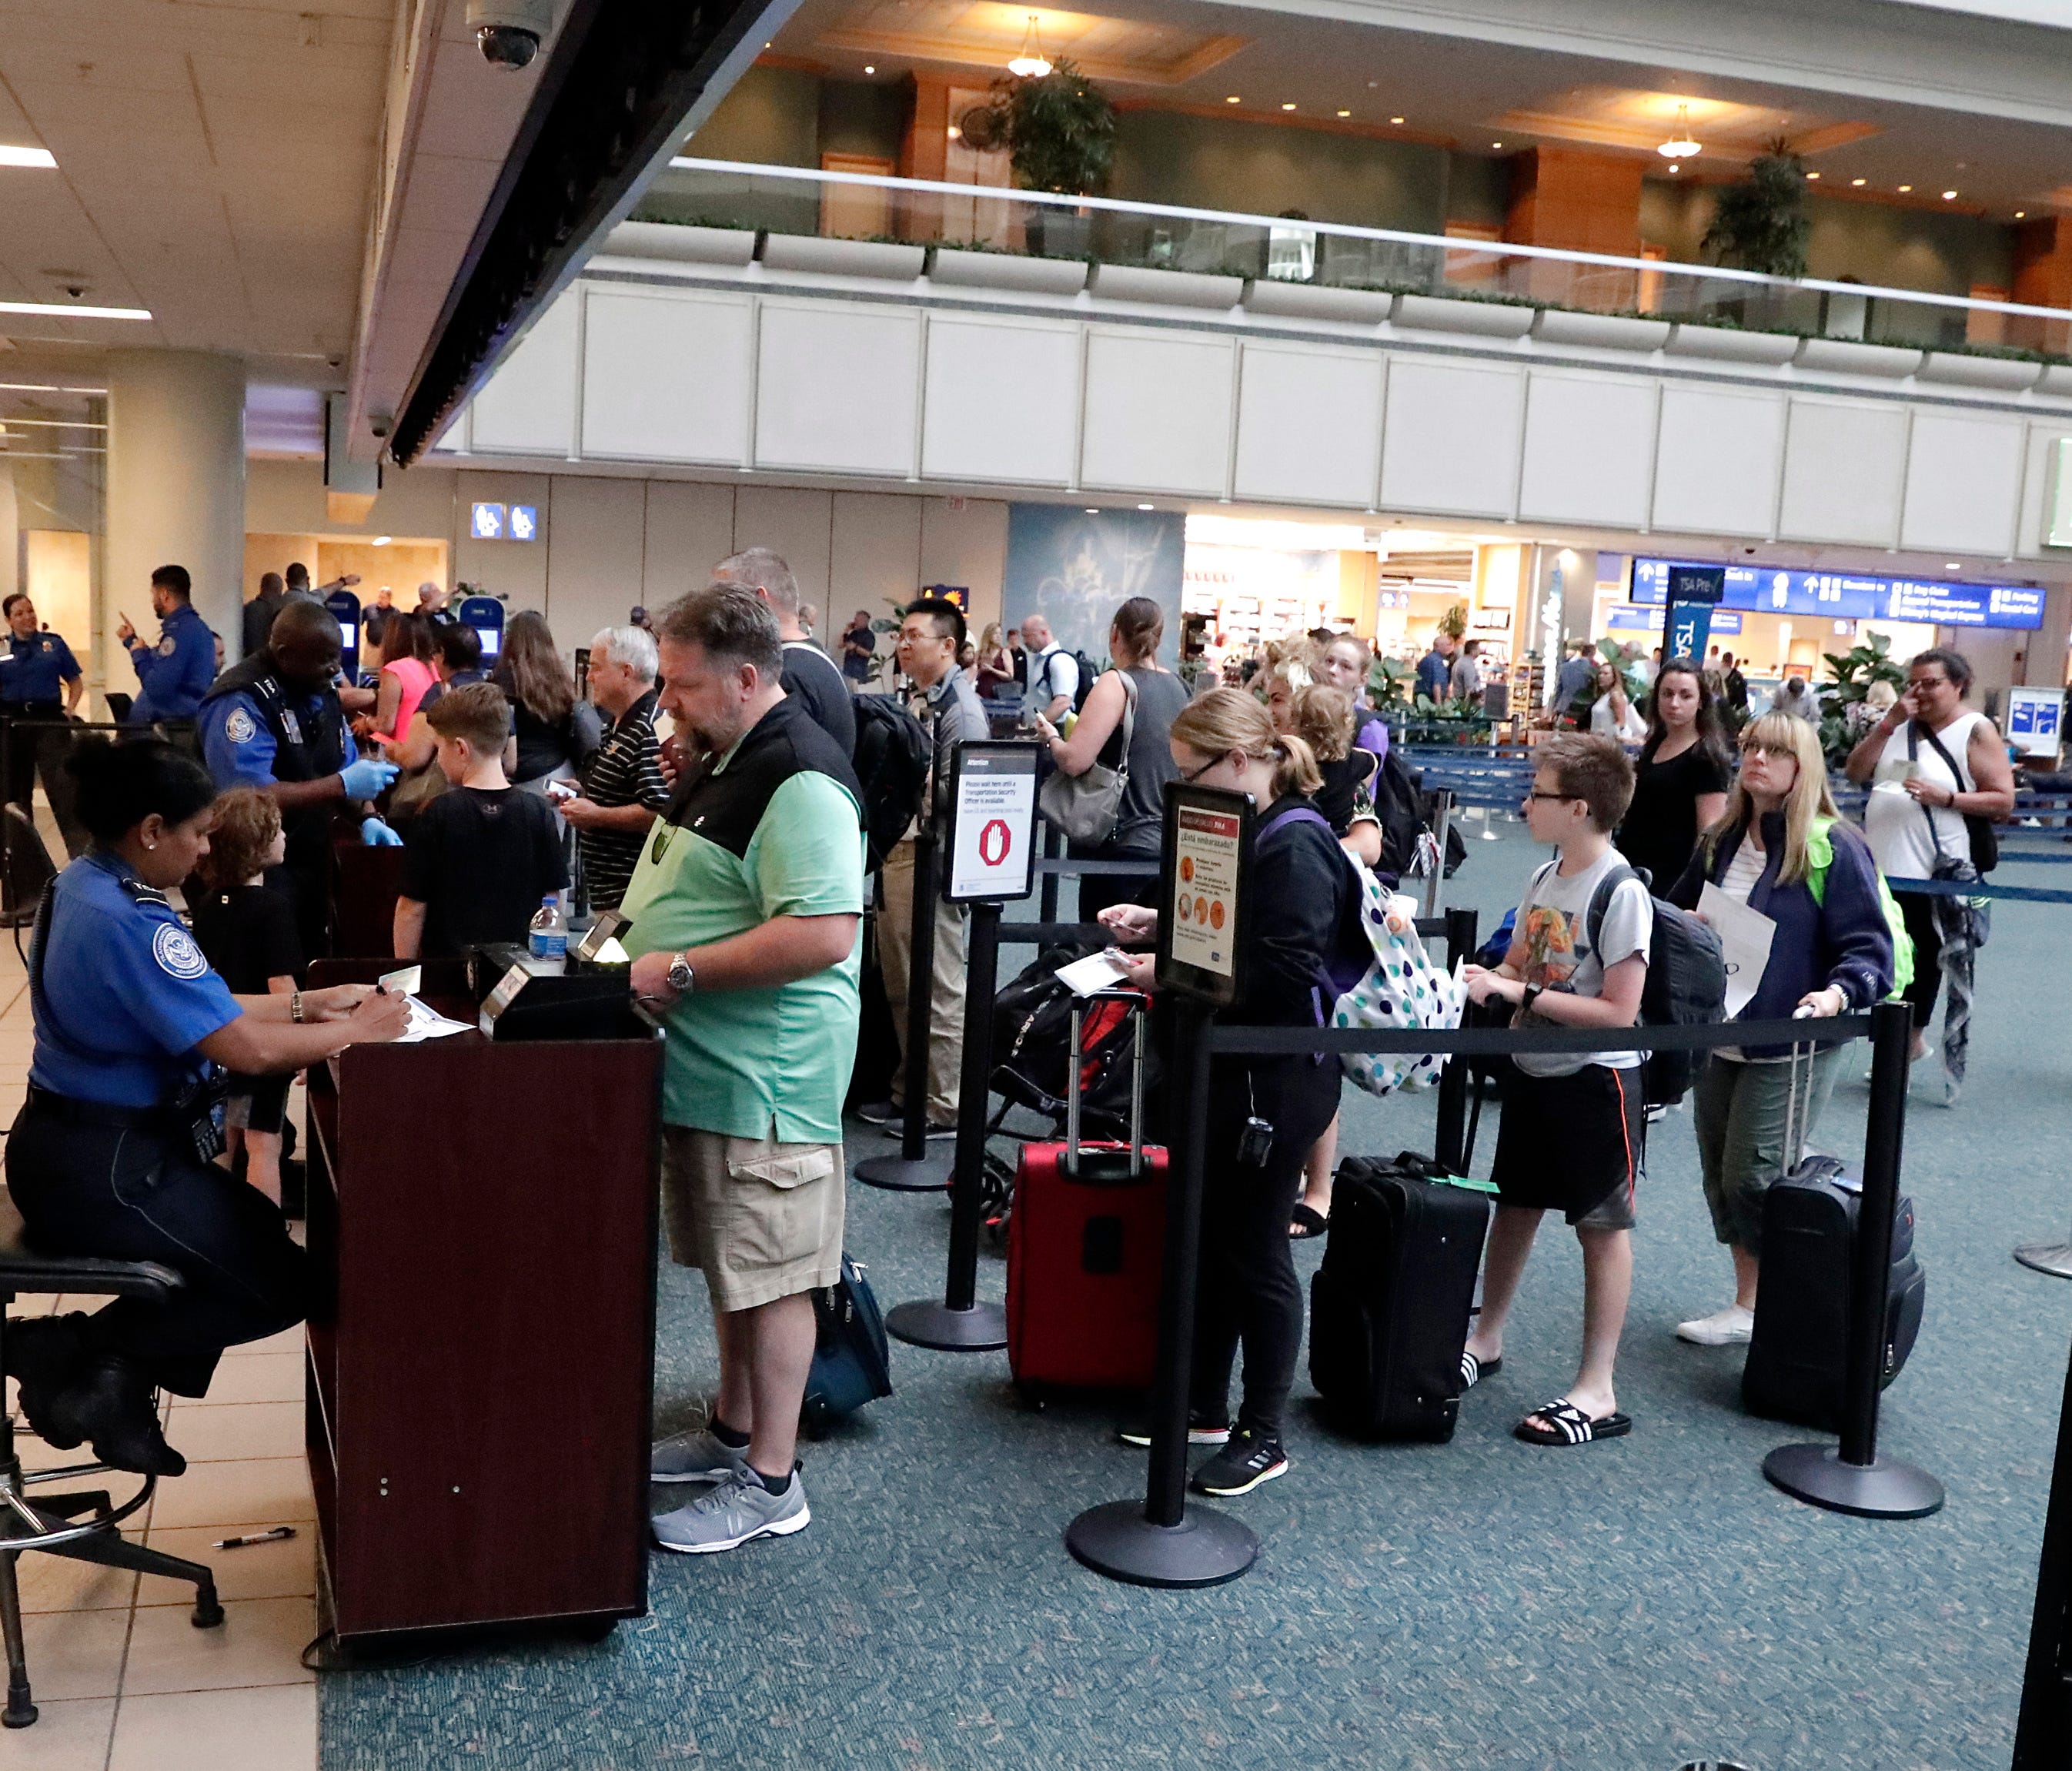 Air passengers heading to their departure gates enter Transportation Security Administration Precheck line before going through security screening at Orlando International Airport on June 21, 2018, in Orlando, Fla.